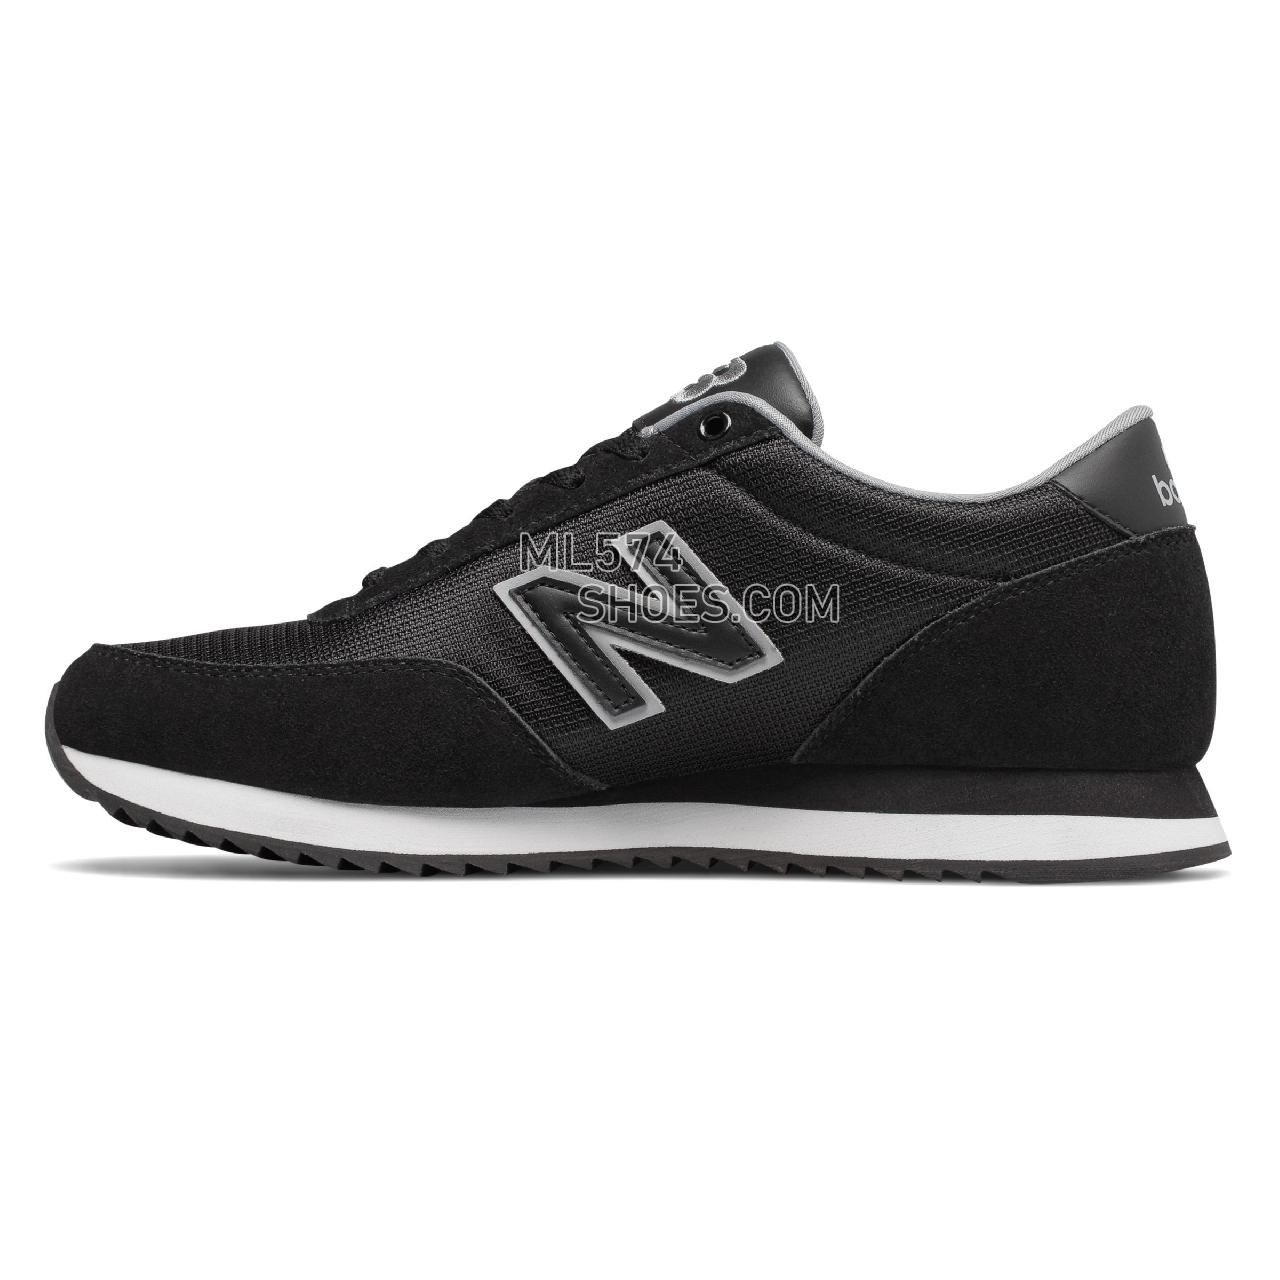 New Balance 501 Ripple Sole - Men's 501 - Classic Black with Silver Mink - MZ501CRB